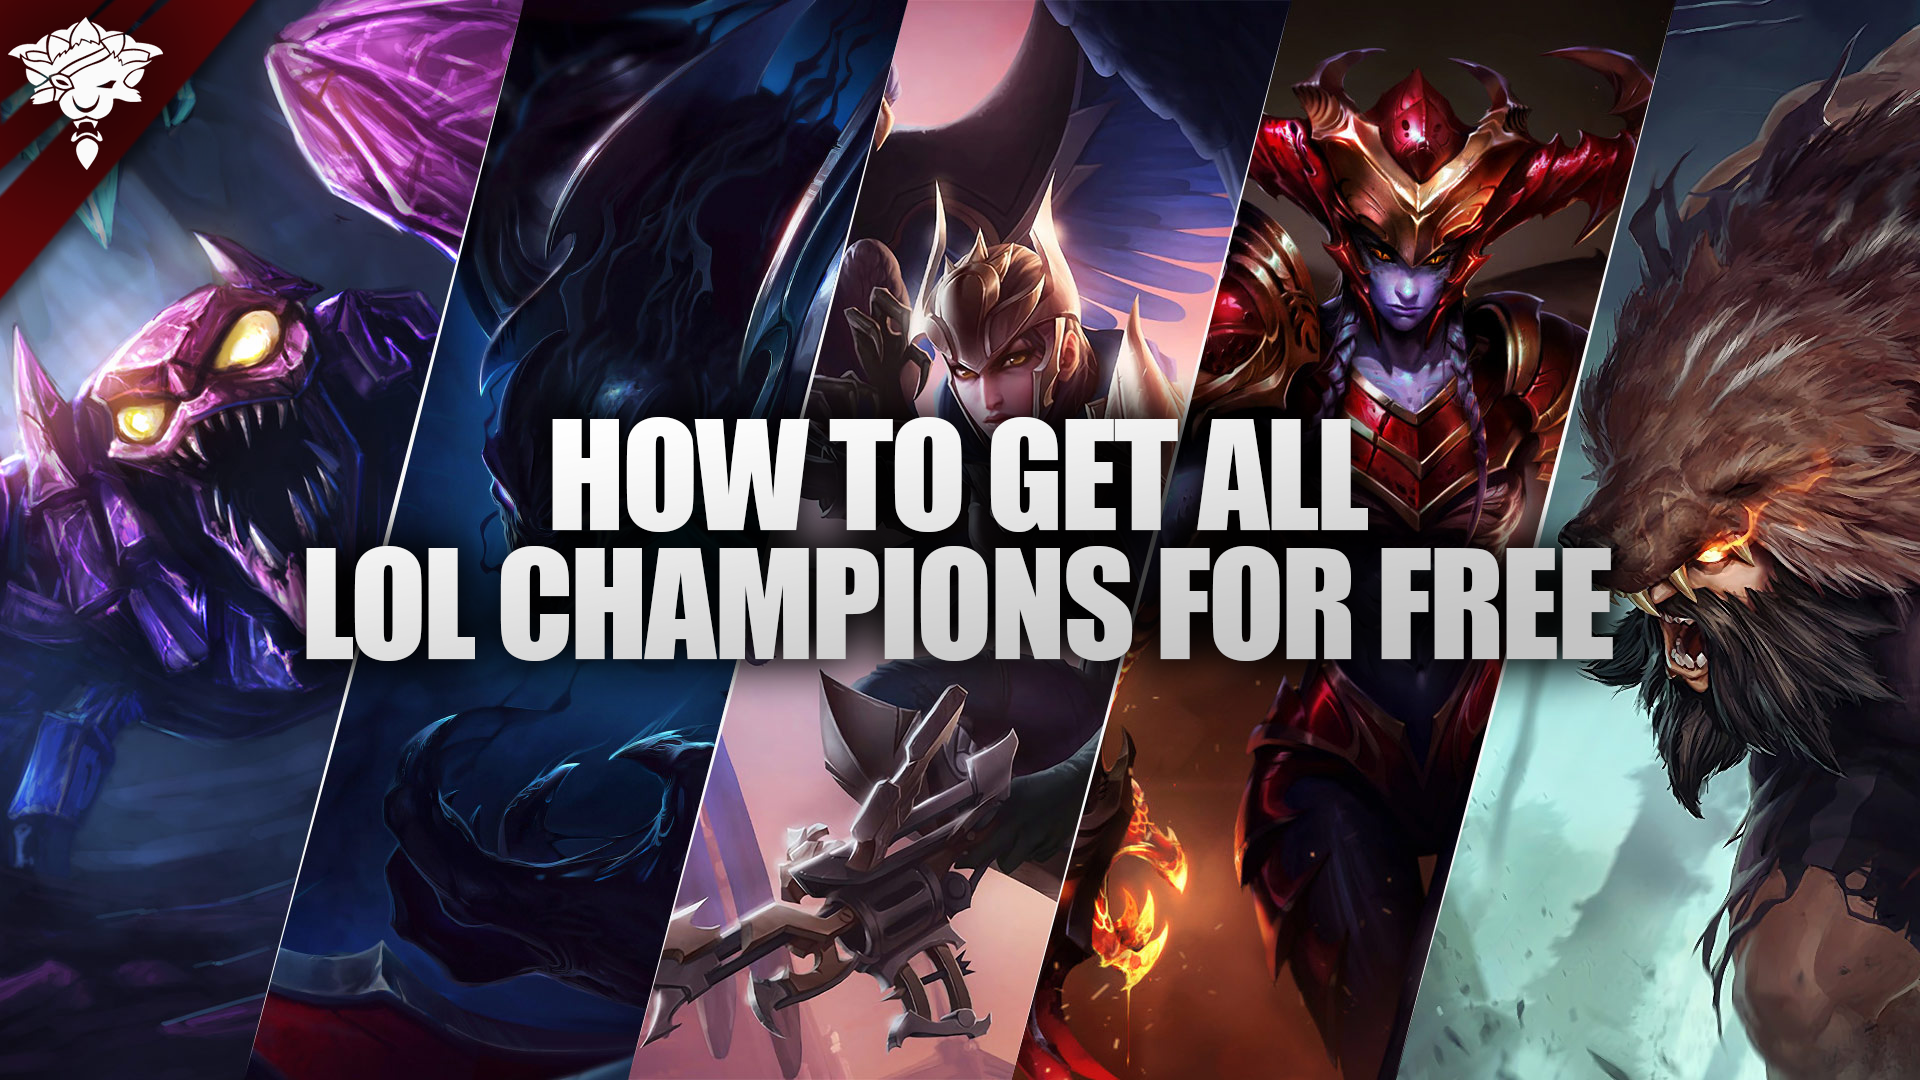 How To Get All League of Legends Champions For Free